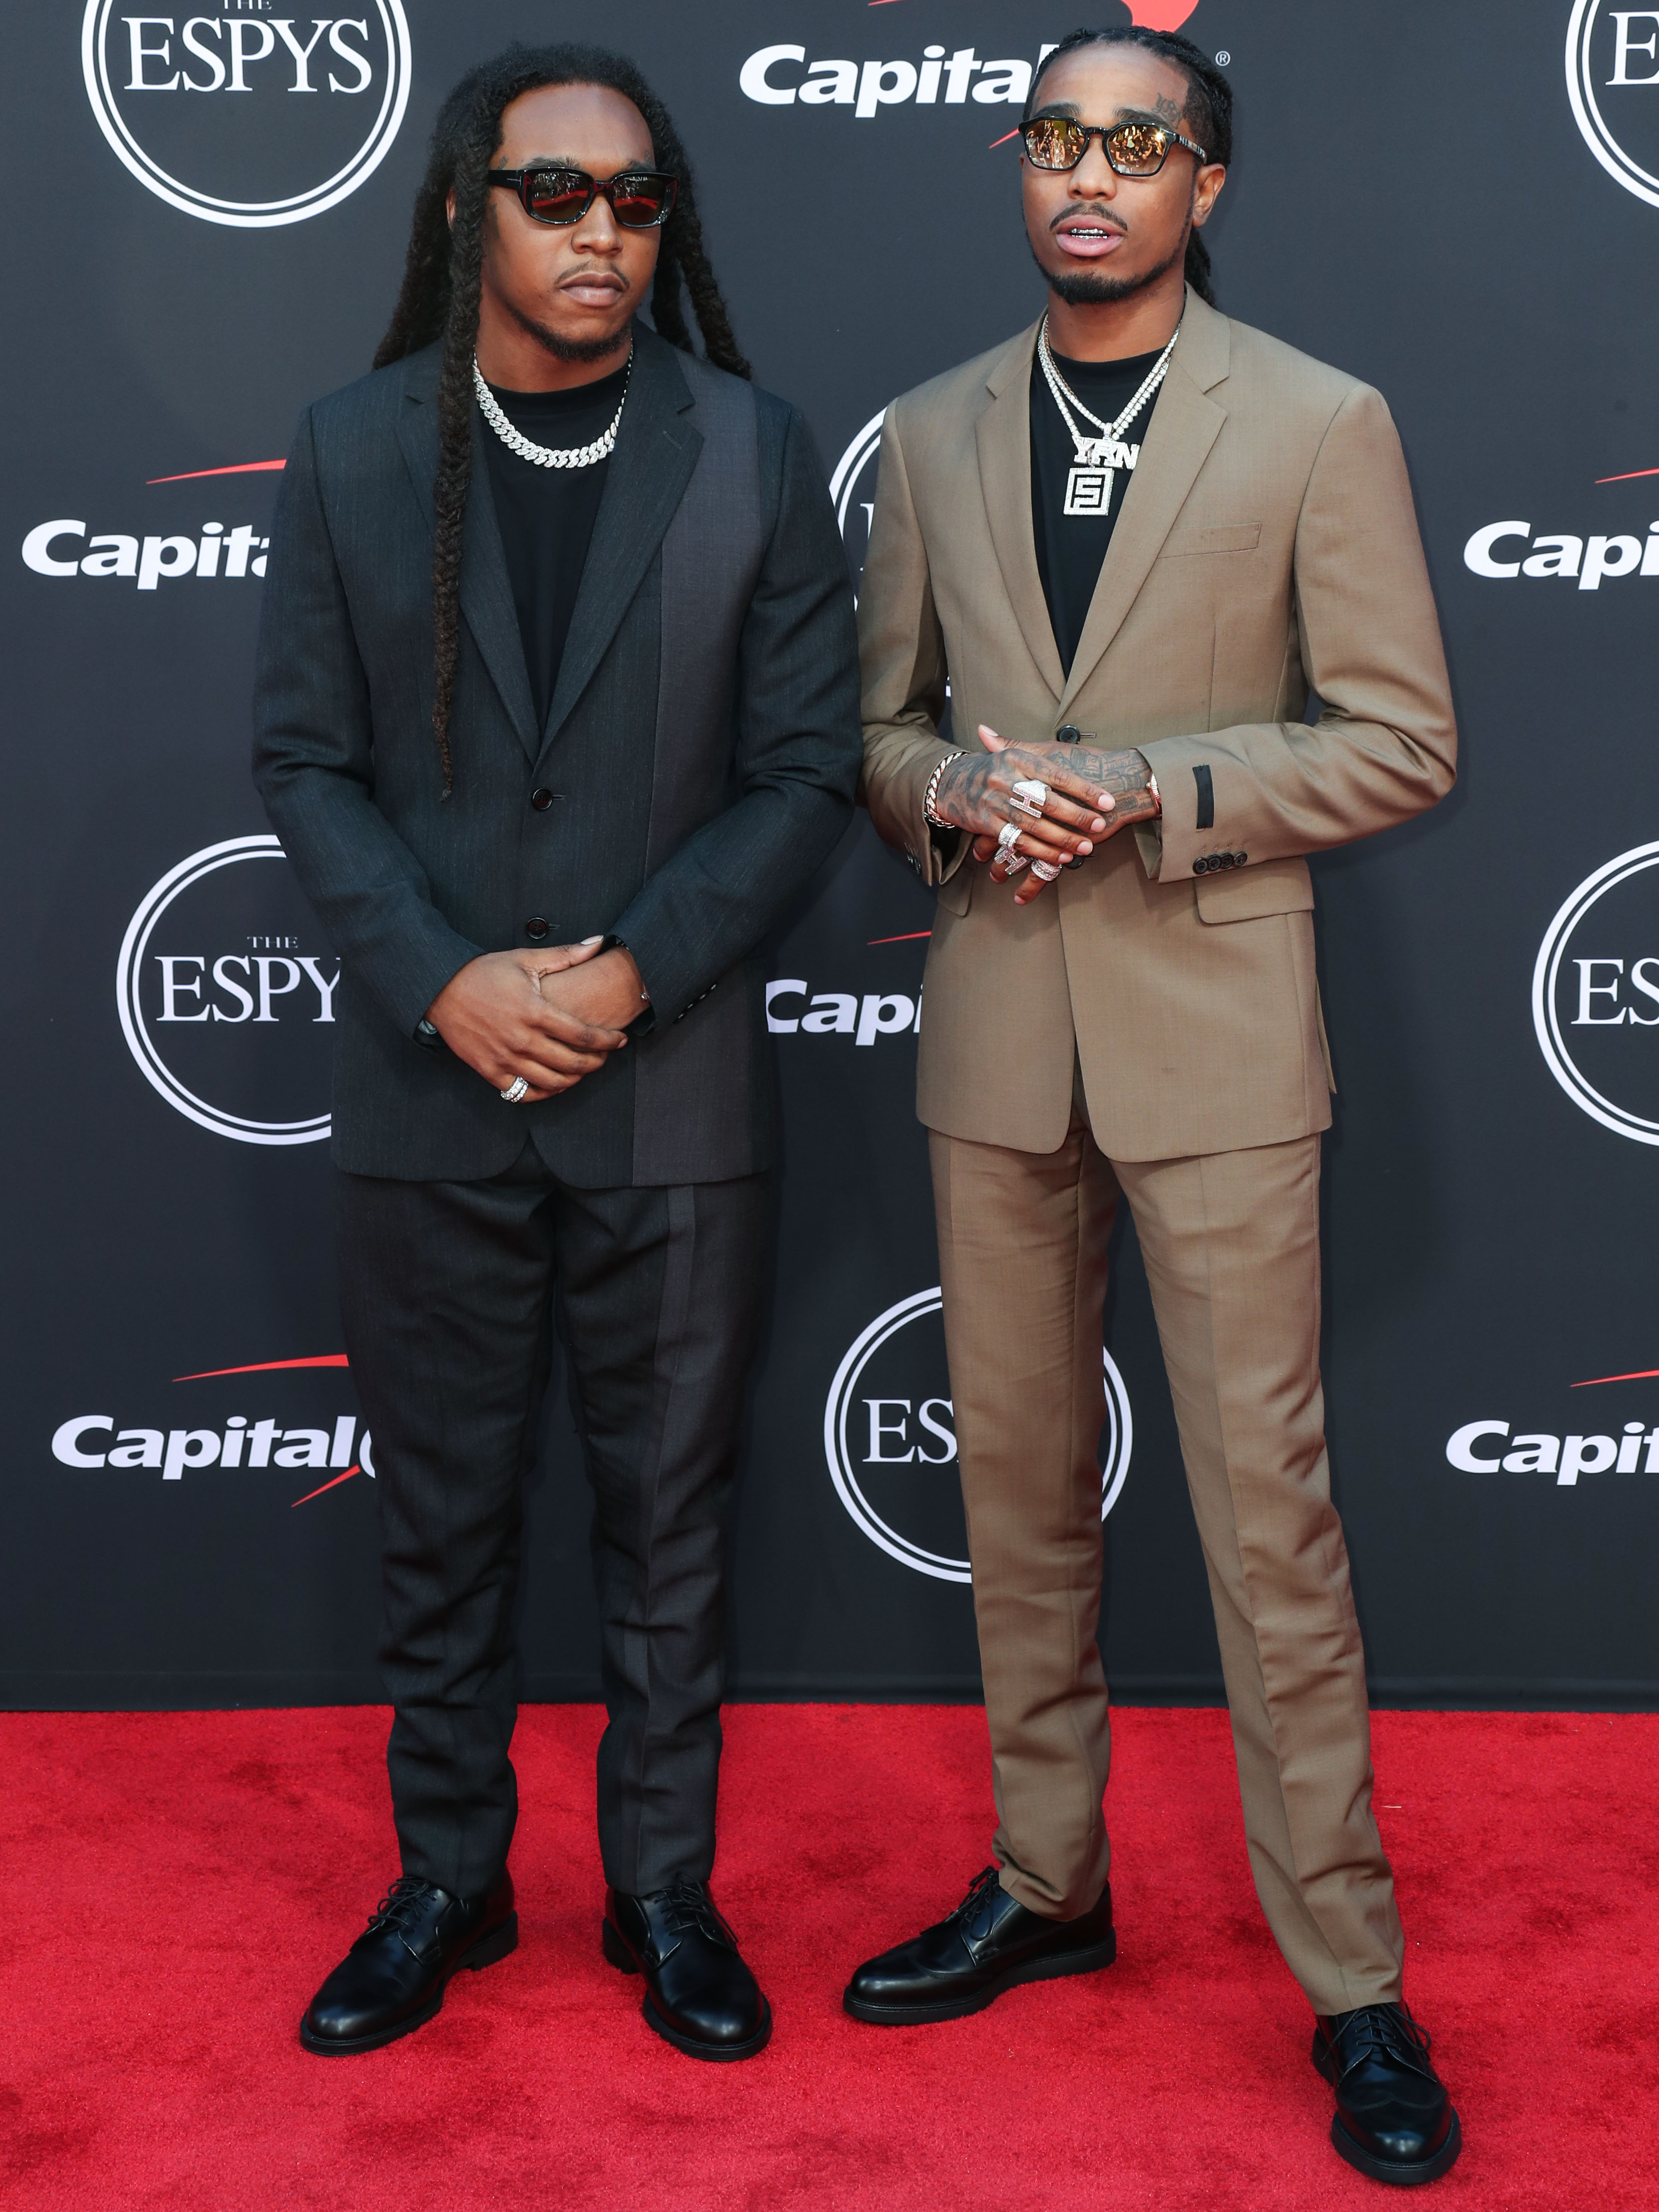 Takeoff and Quavo of Migos arrive at the 2019 ESPY Awards held at Microsoft Theater L.A. Live on July 10, 2019 in Los Angeles, California, United States. (Photo by Xavier Collin/Image Press Agency)